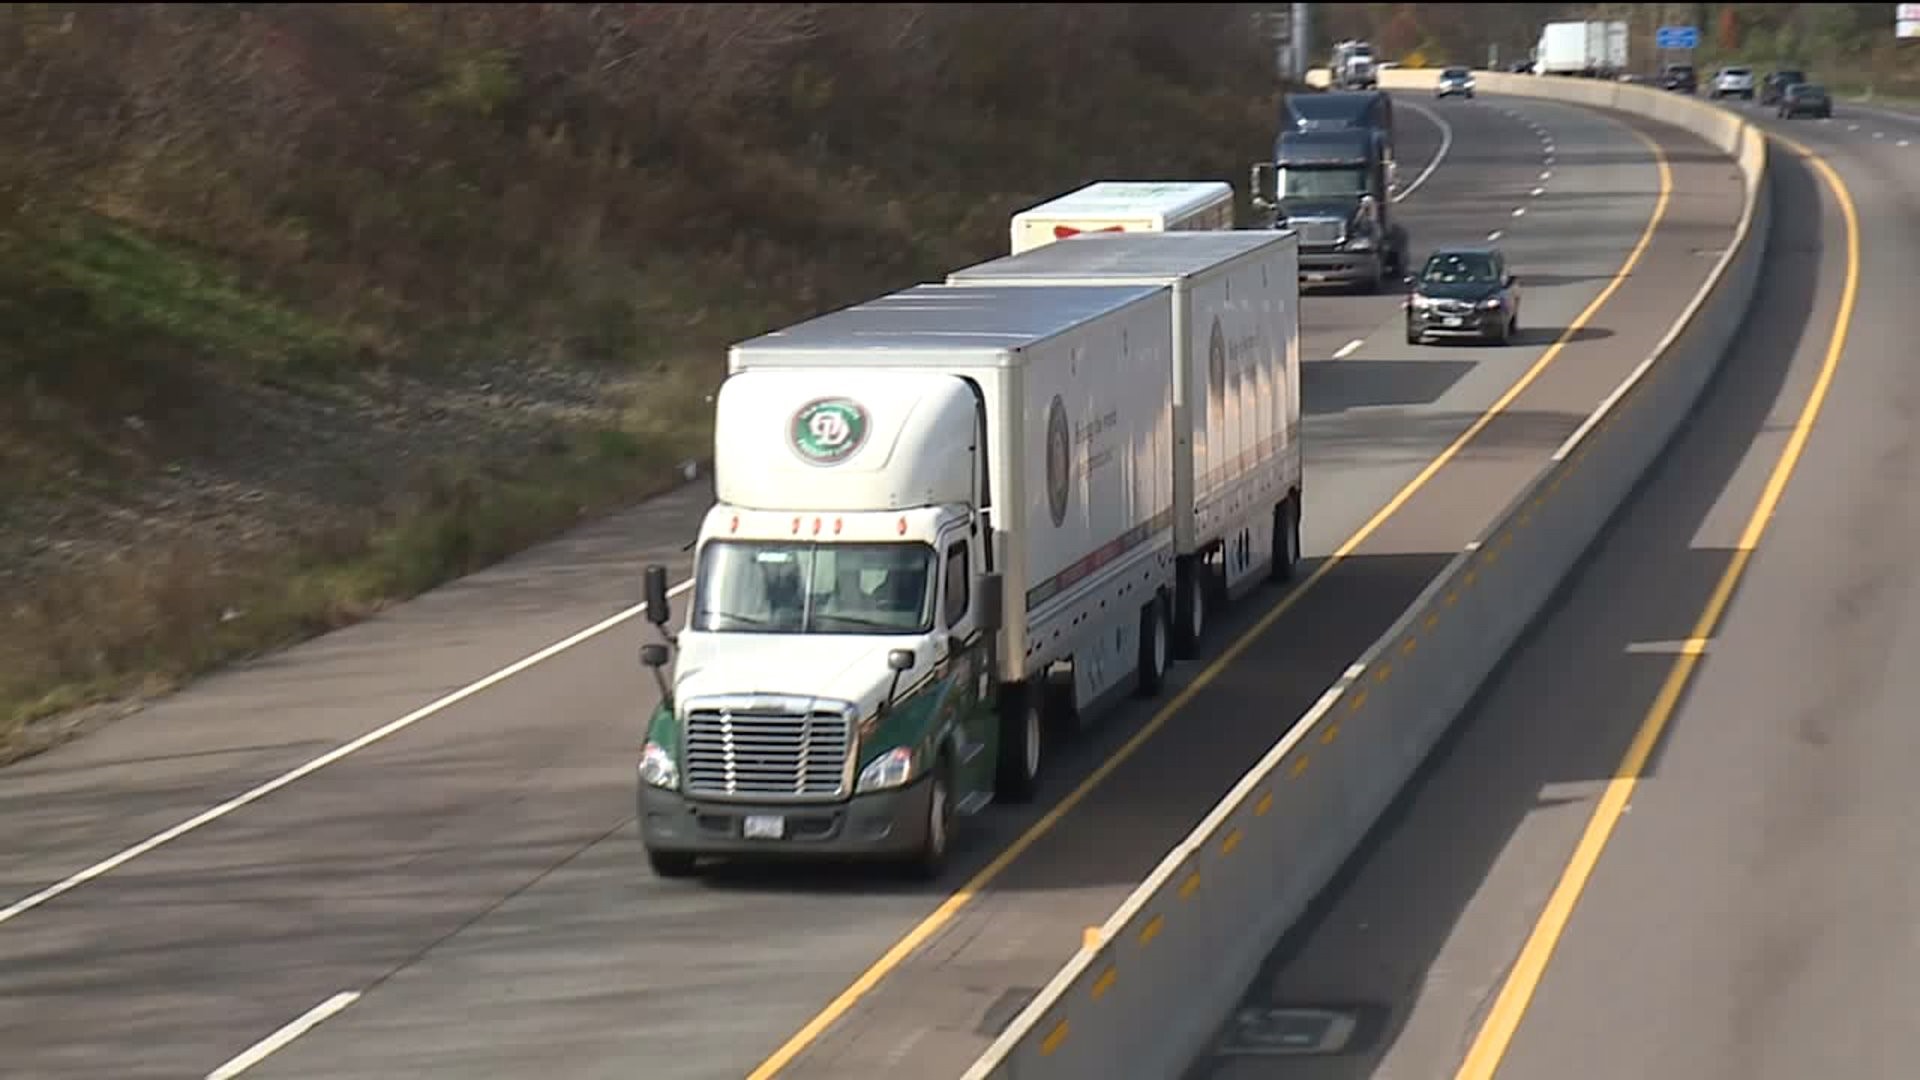 What's Driving the Increase in Truck Traffic?